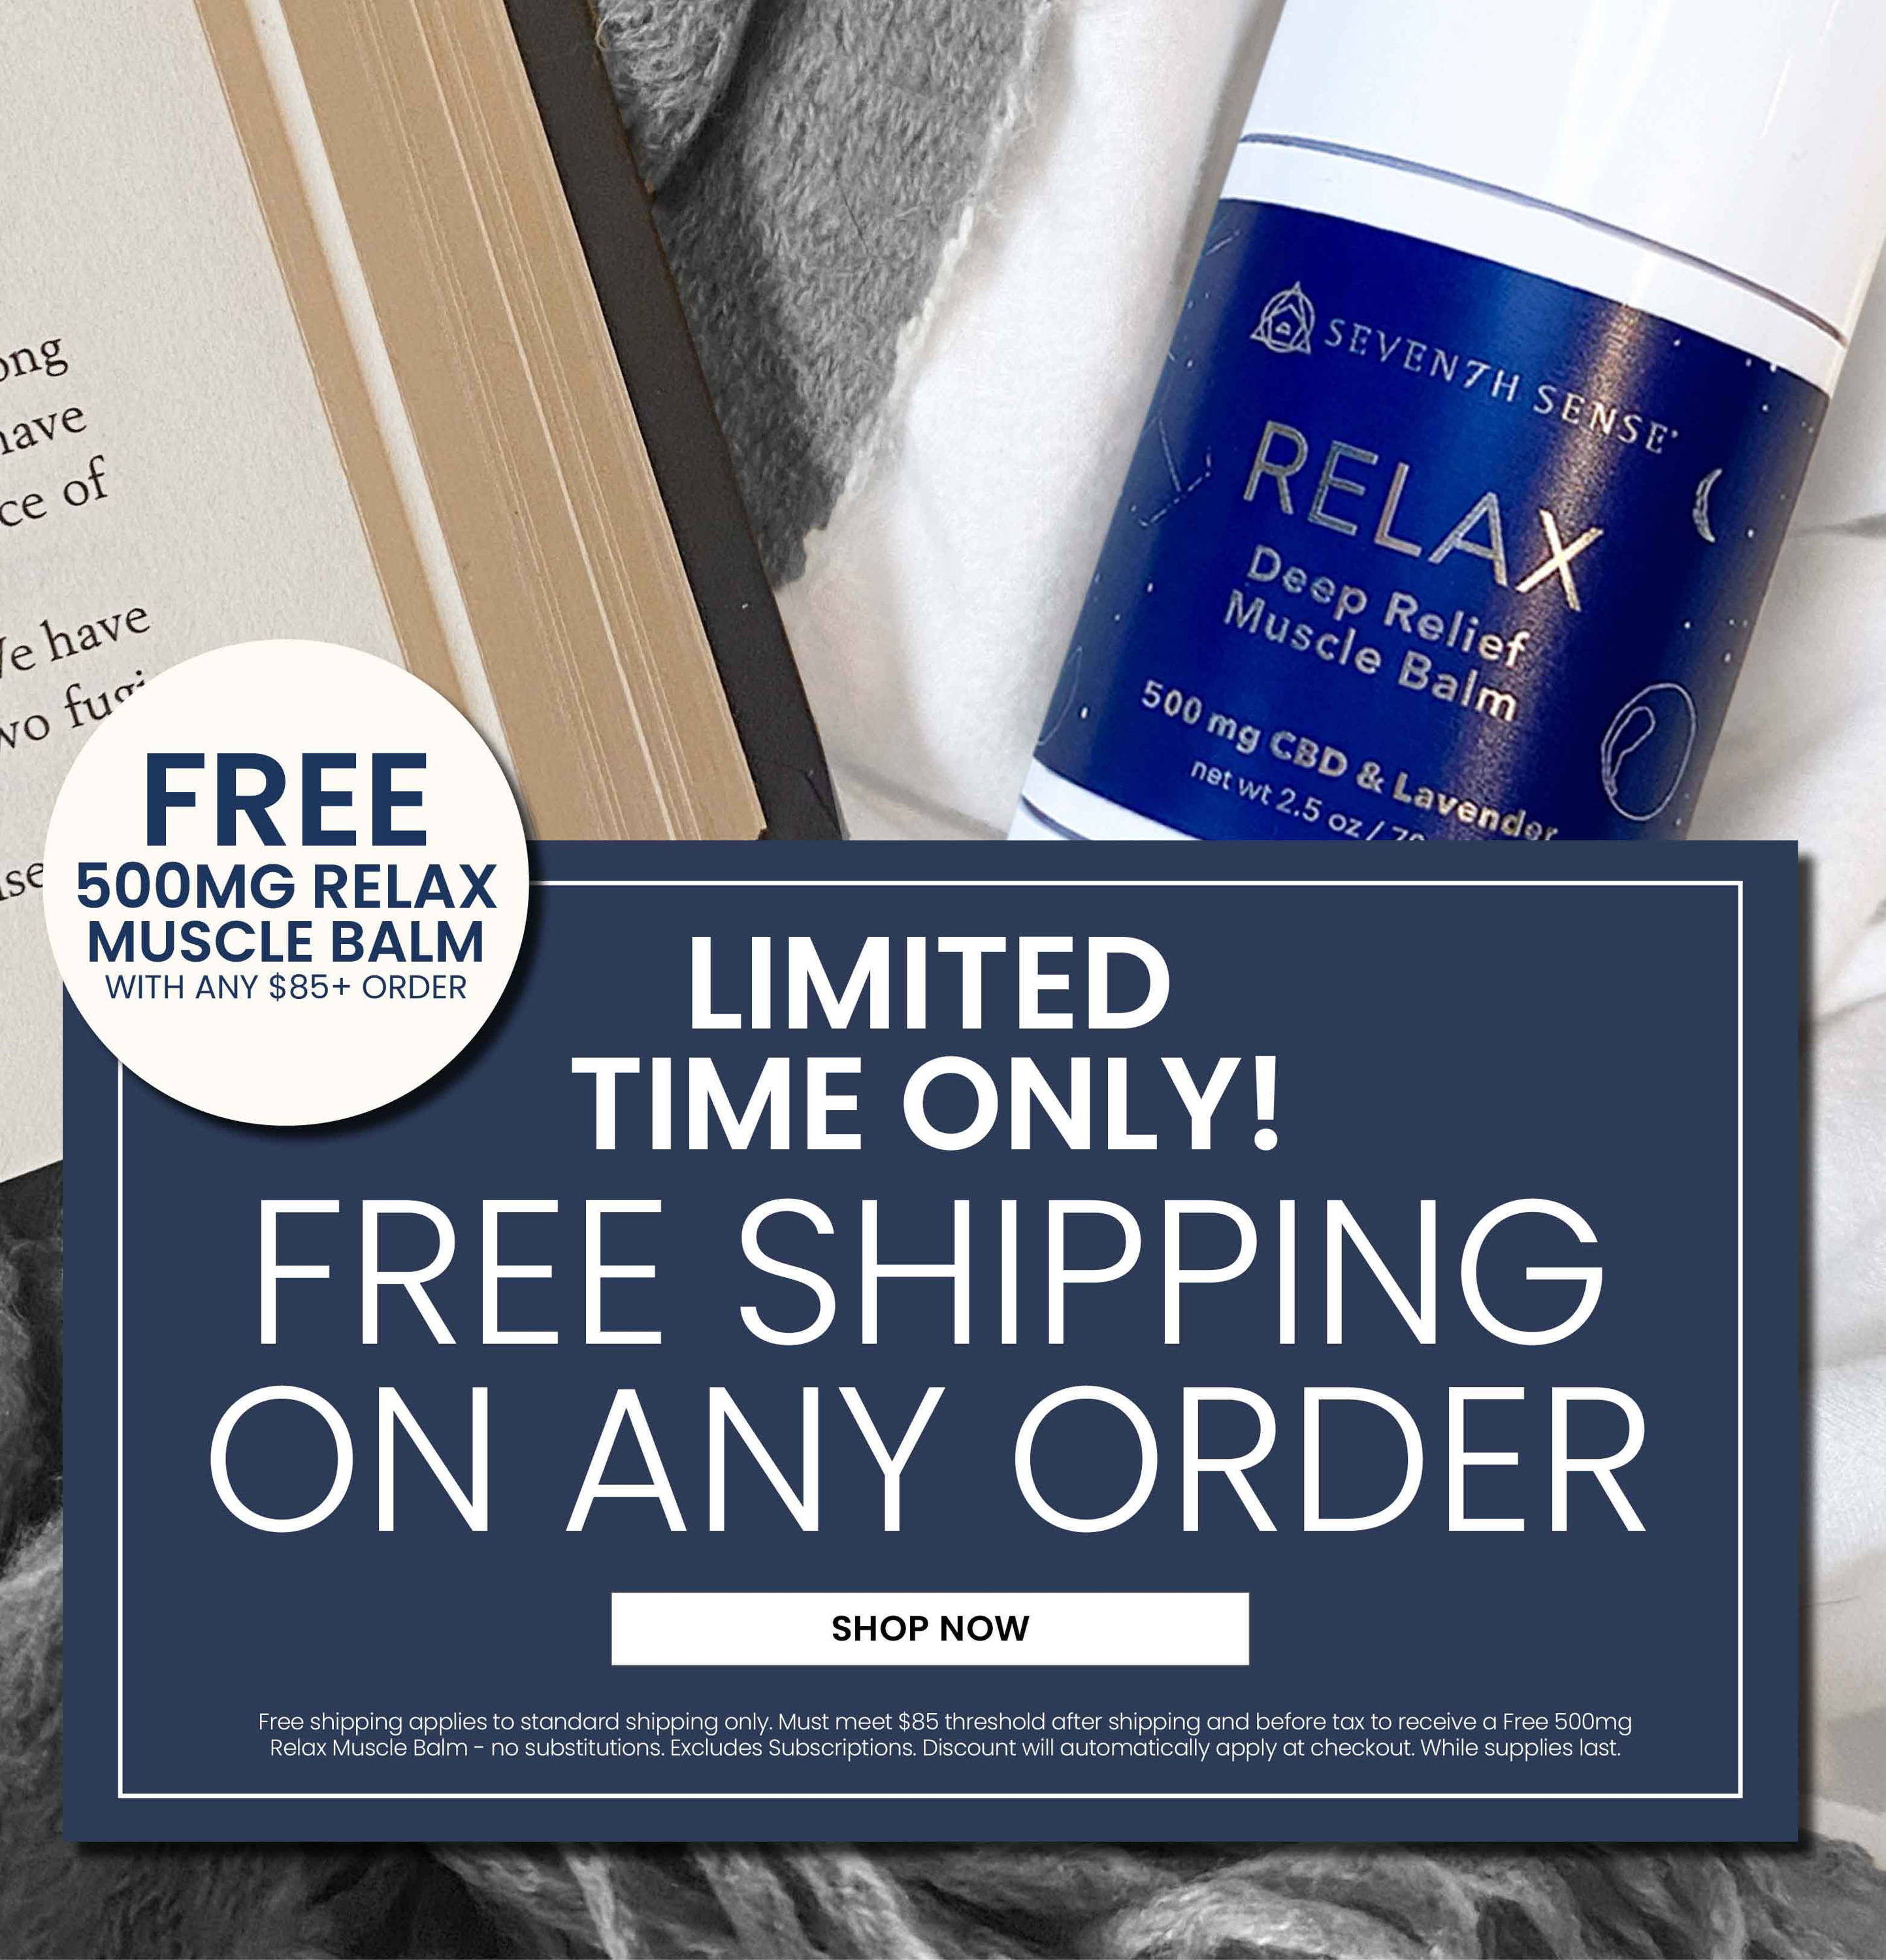 Limited Time Only! Free Shipping on ANY Order. PLUS, Receive a Free 500mg Relax Muscle Balm with Any $85+ Order.